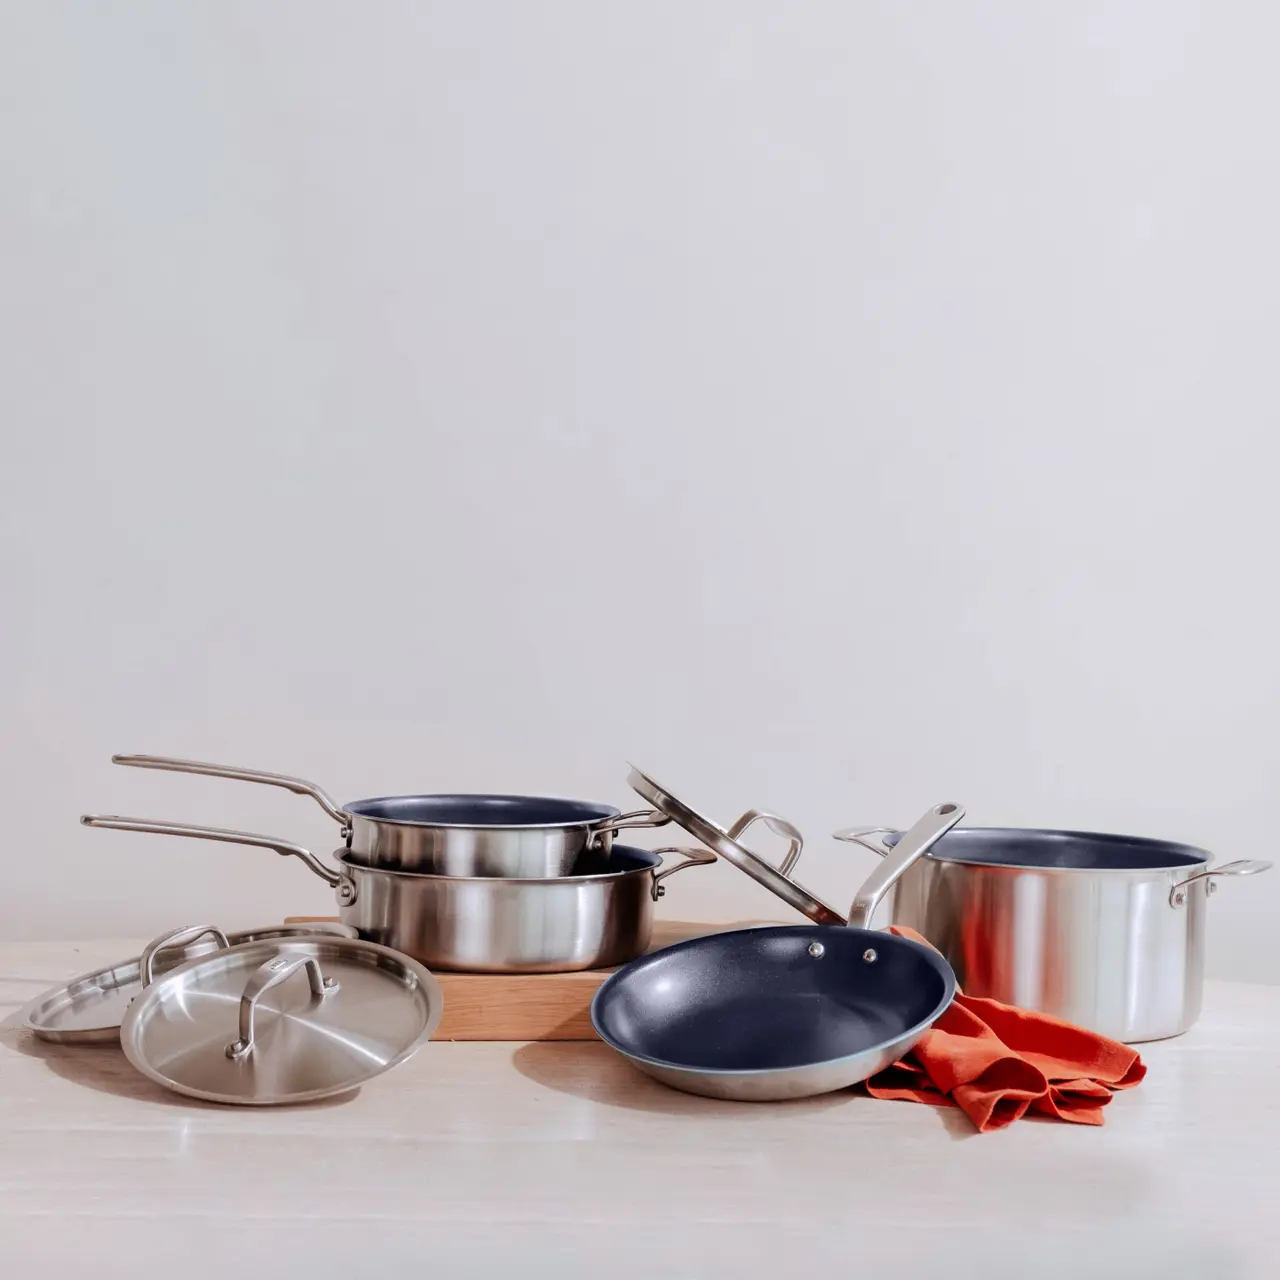 Three stainless steel pots with lids and a frying pan displayed on a wooden surface against a light background, with a red cloth beside them.